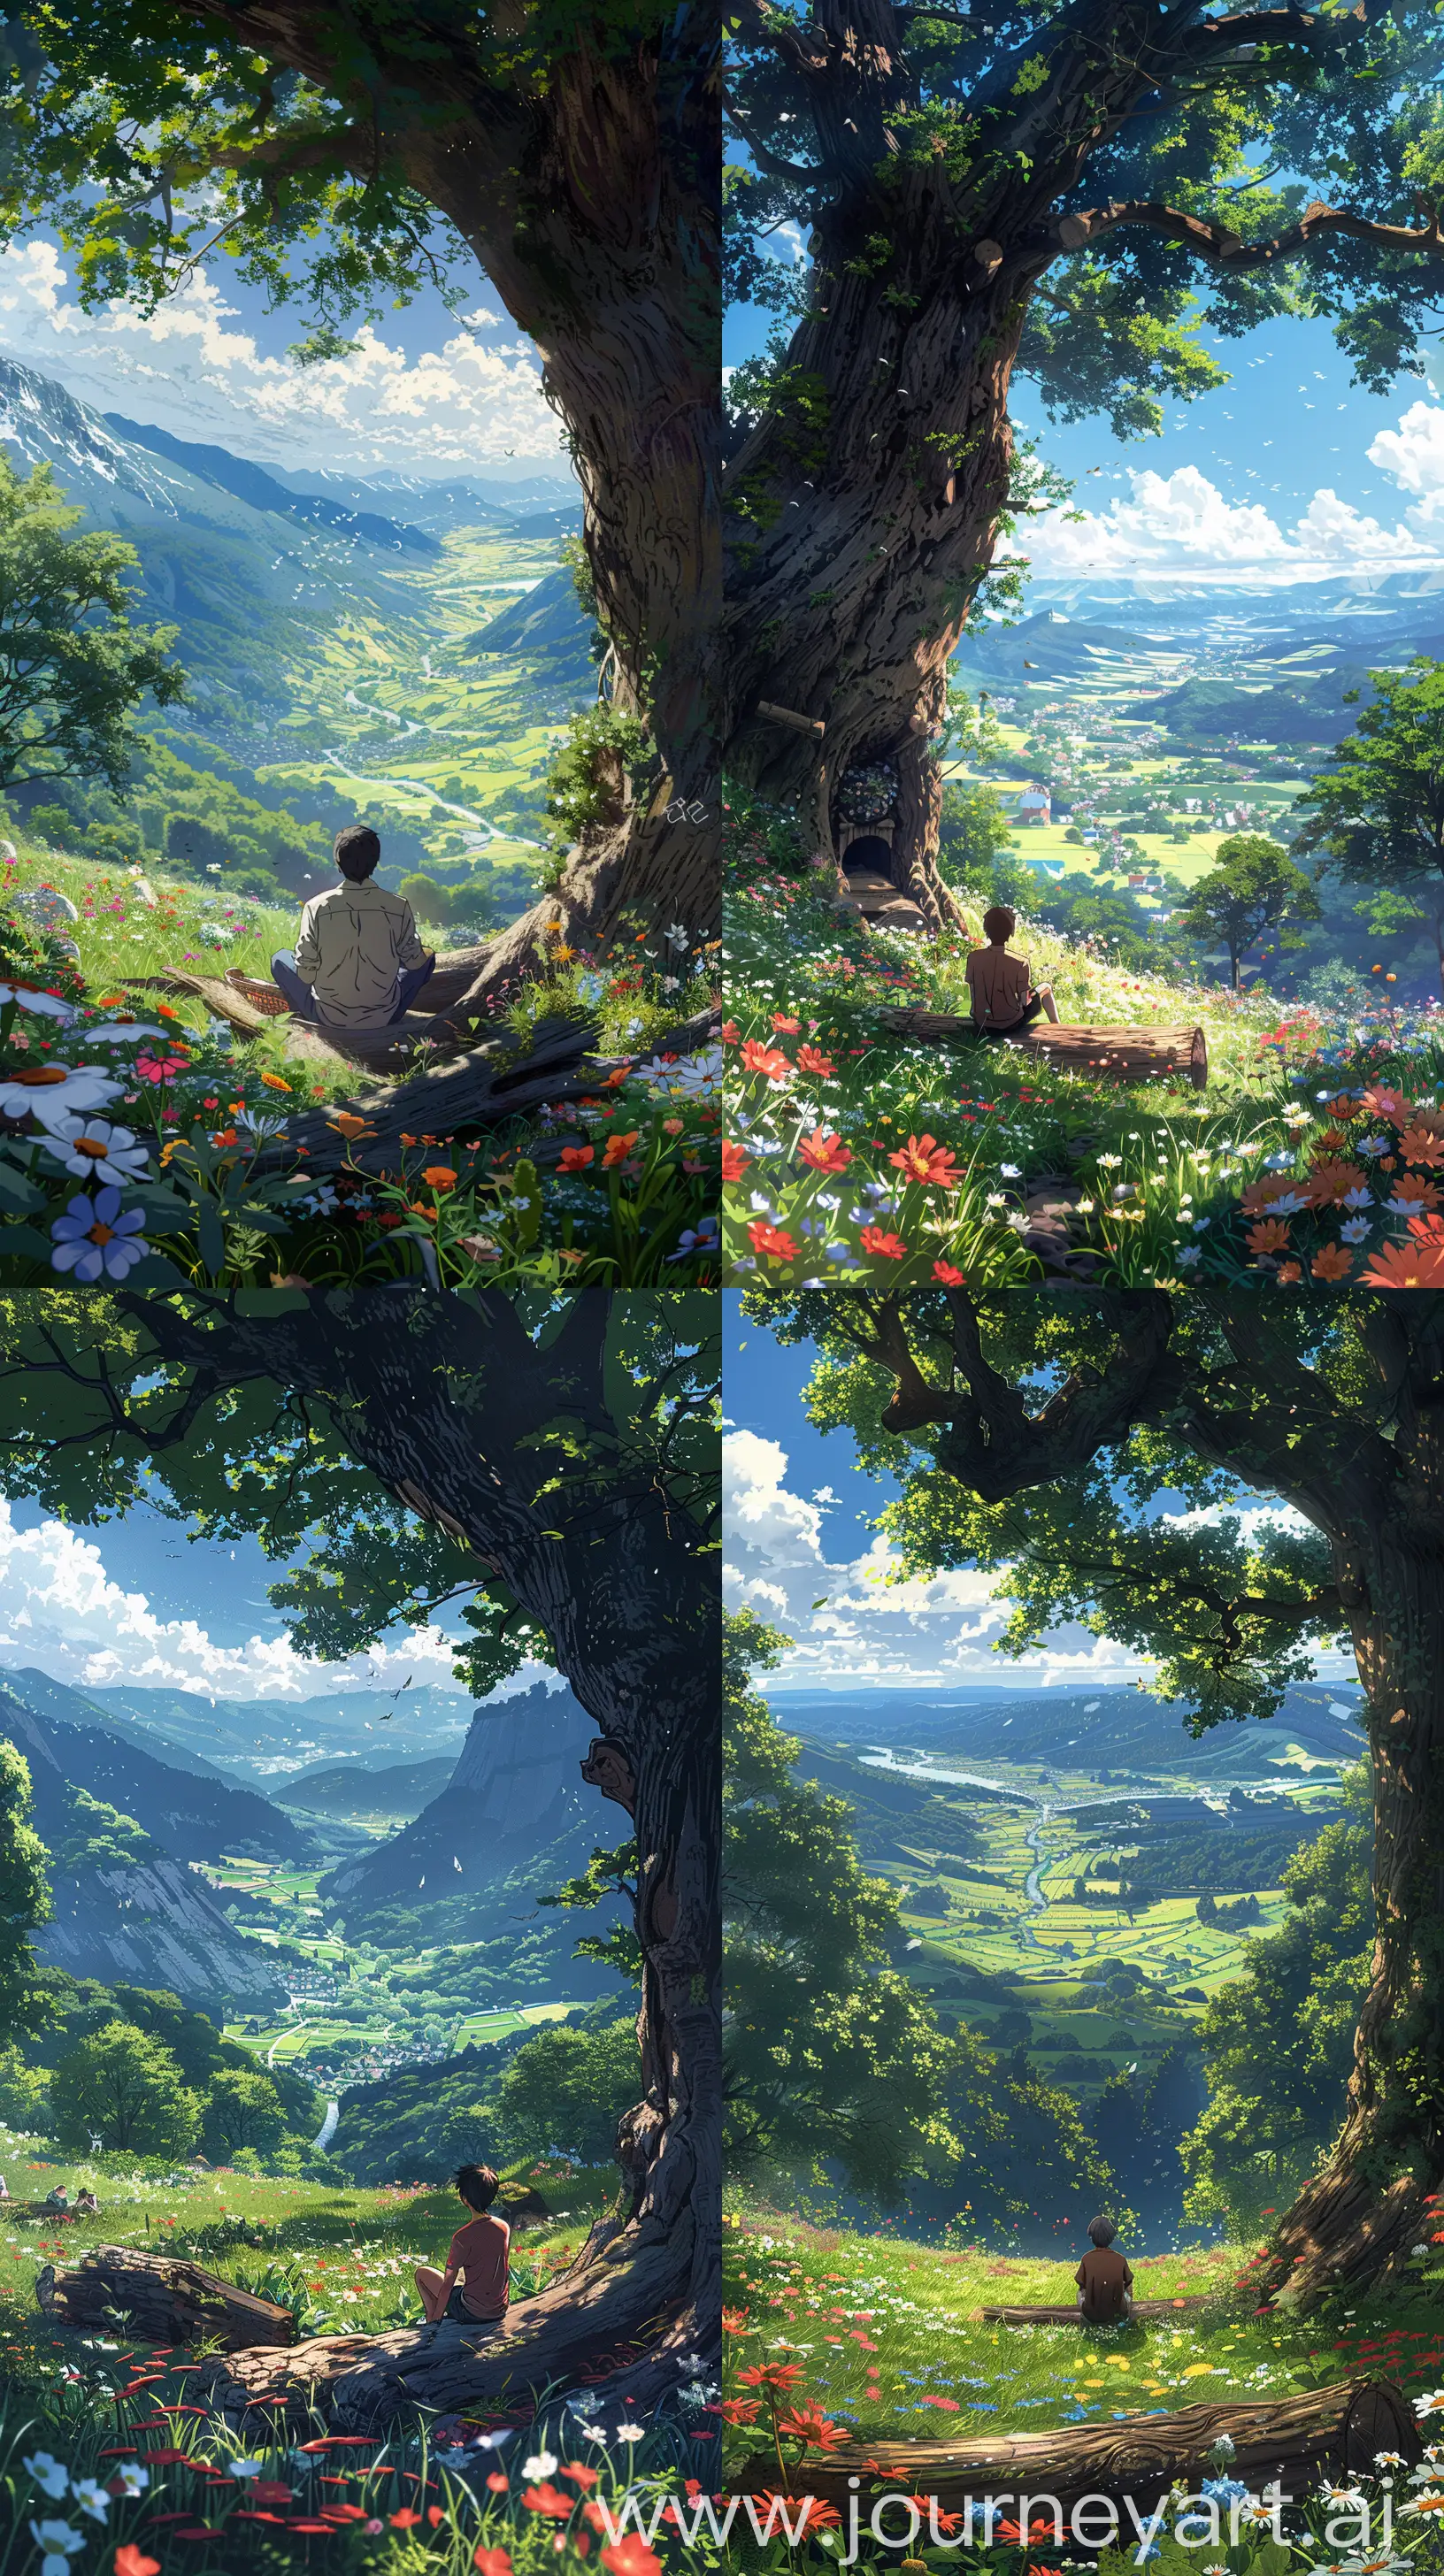 Tranquil-Summer-Scene-Man-Relaxing-Under-Blossoming-Tree-in-Anime-Style